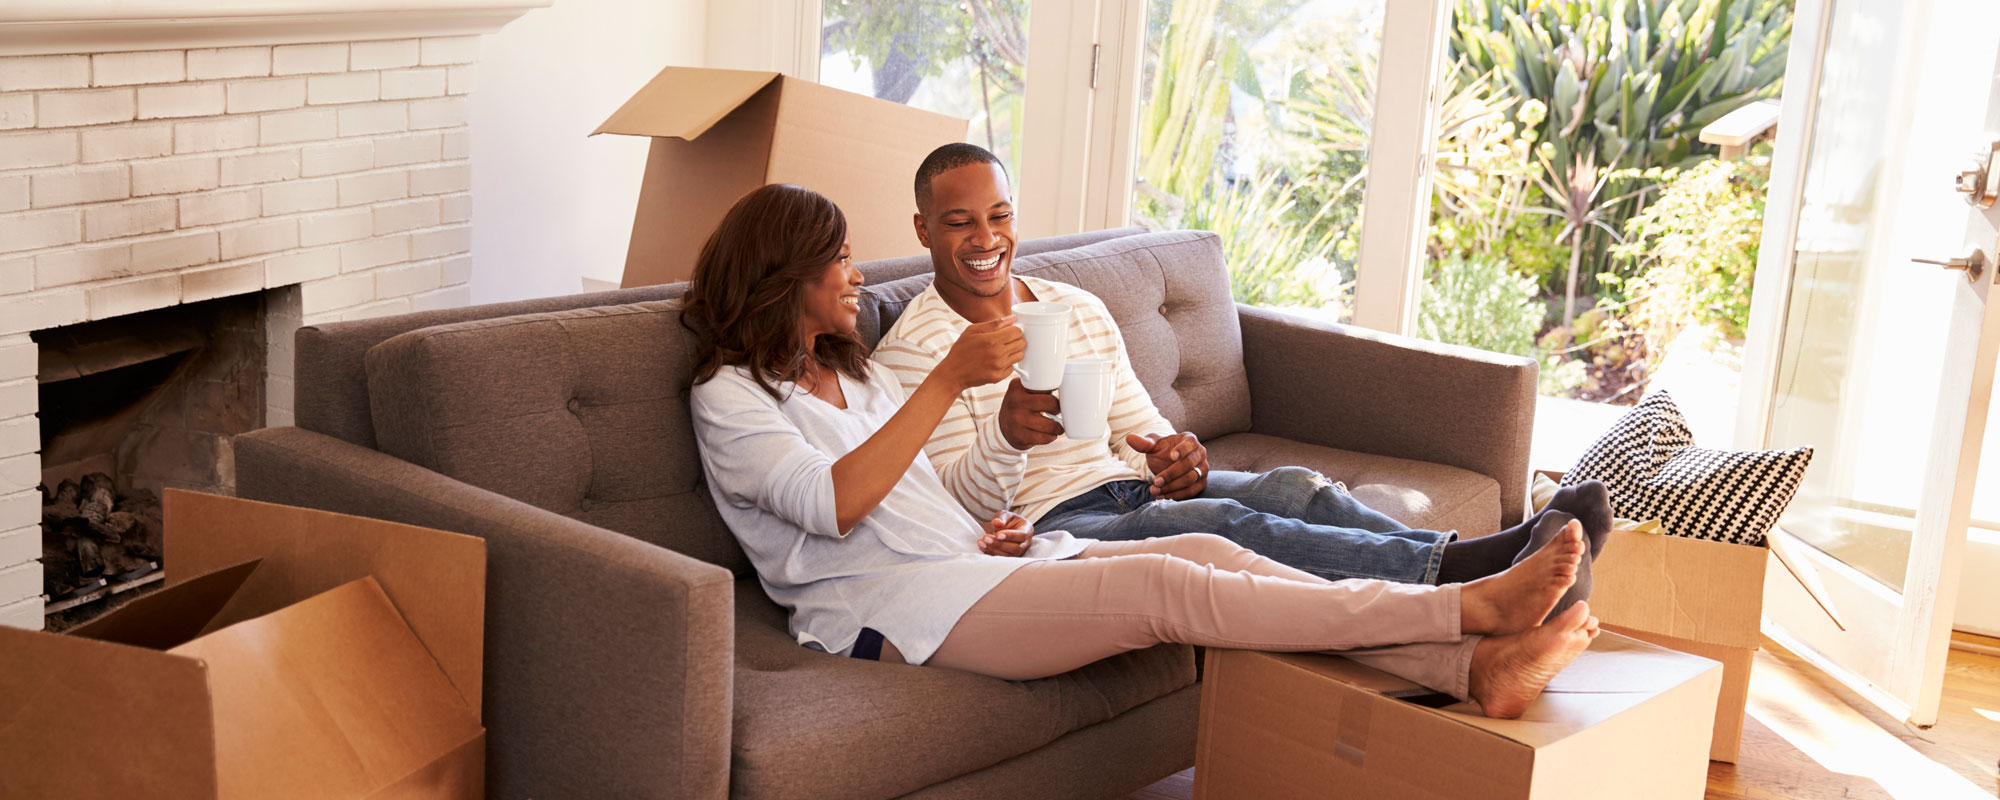 Couple relaxing on couch after unpacking boxes